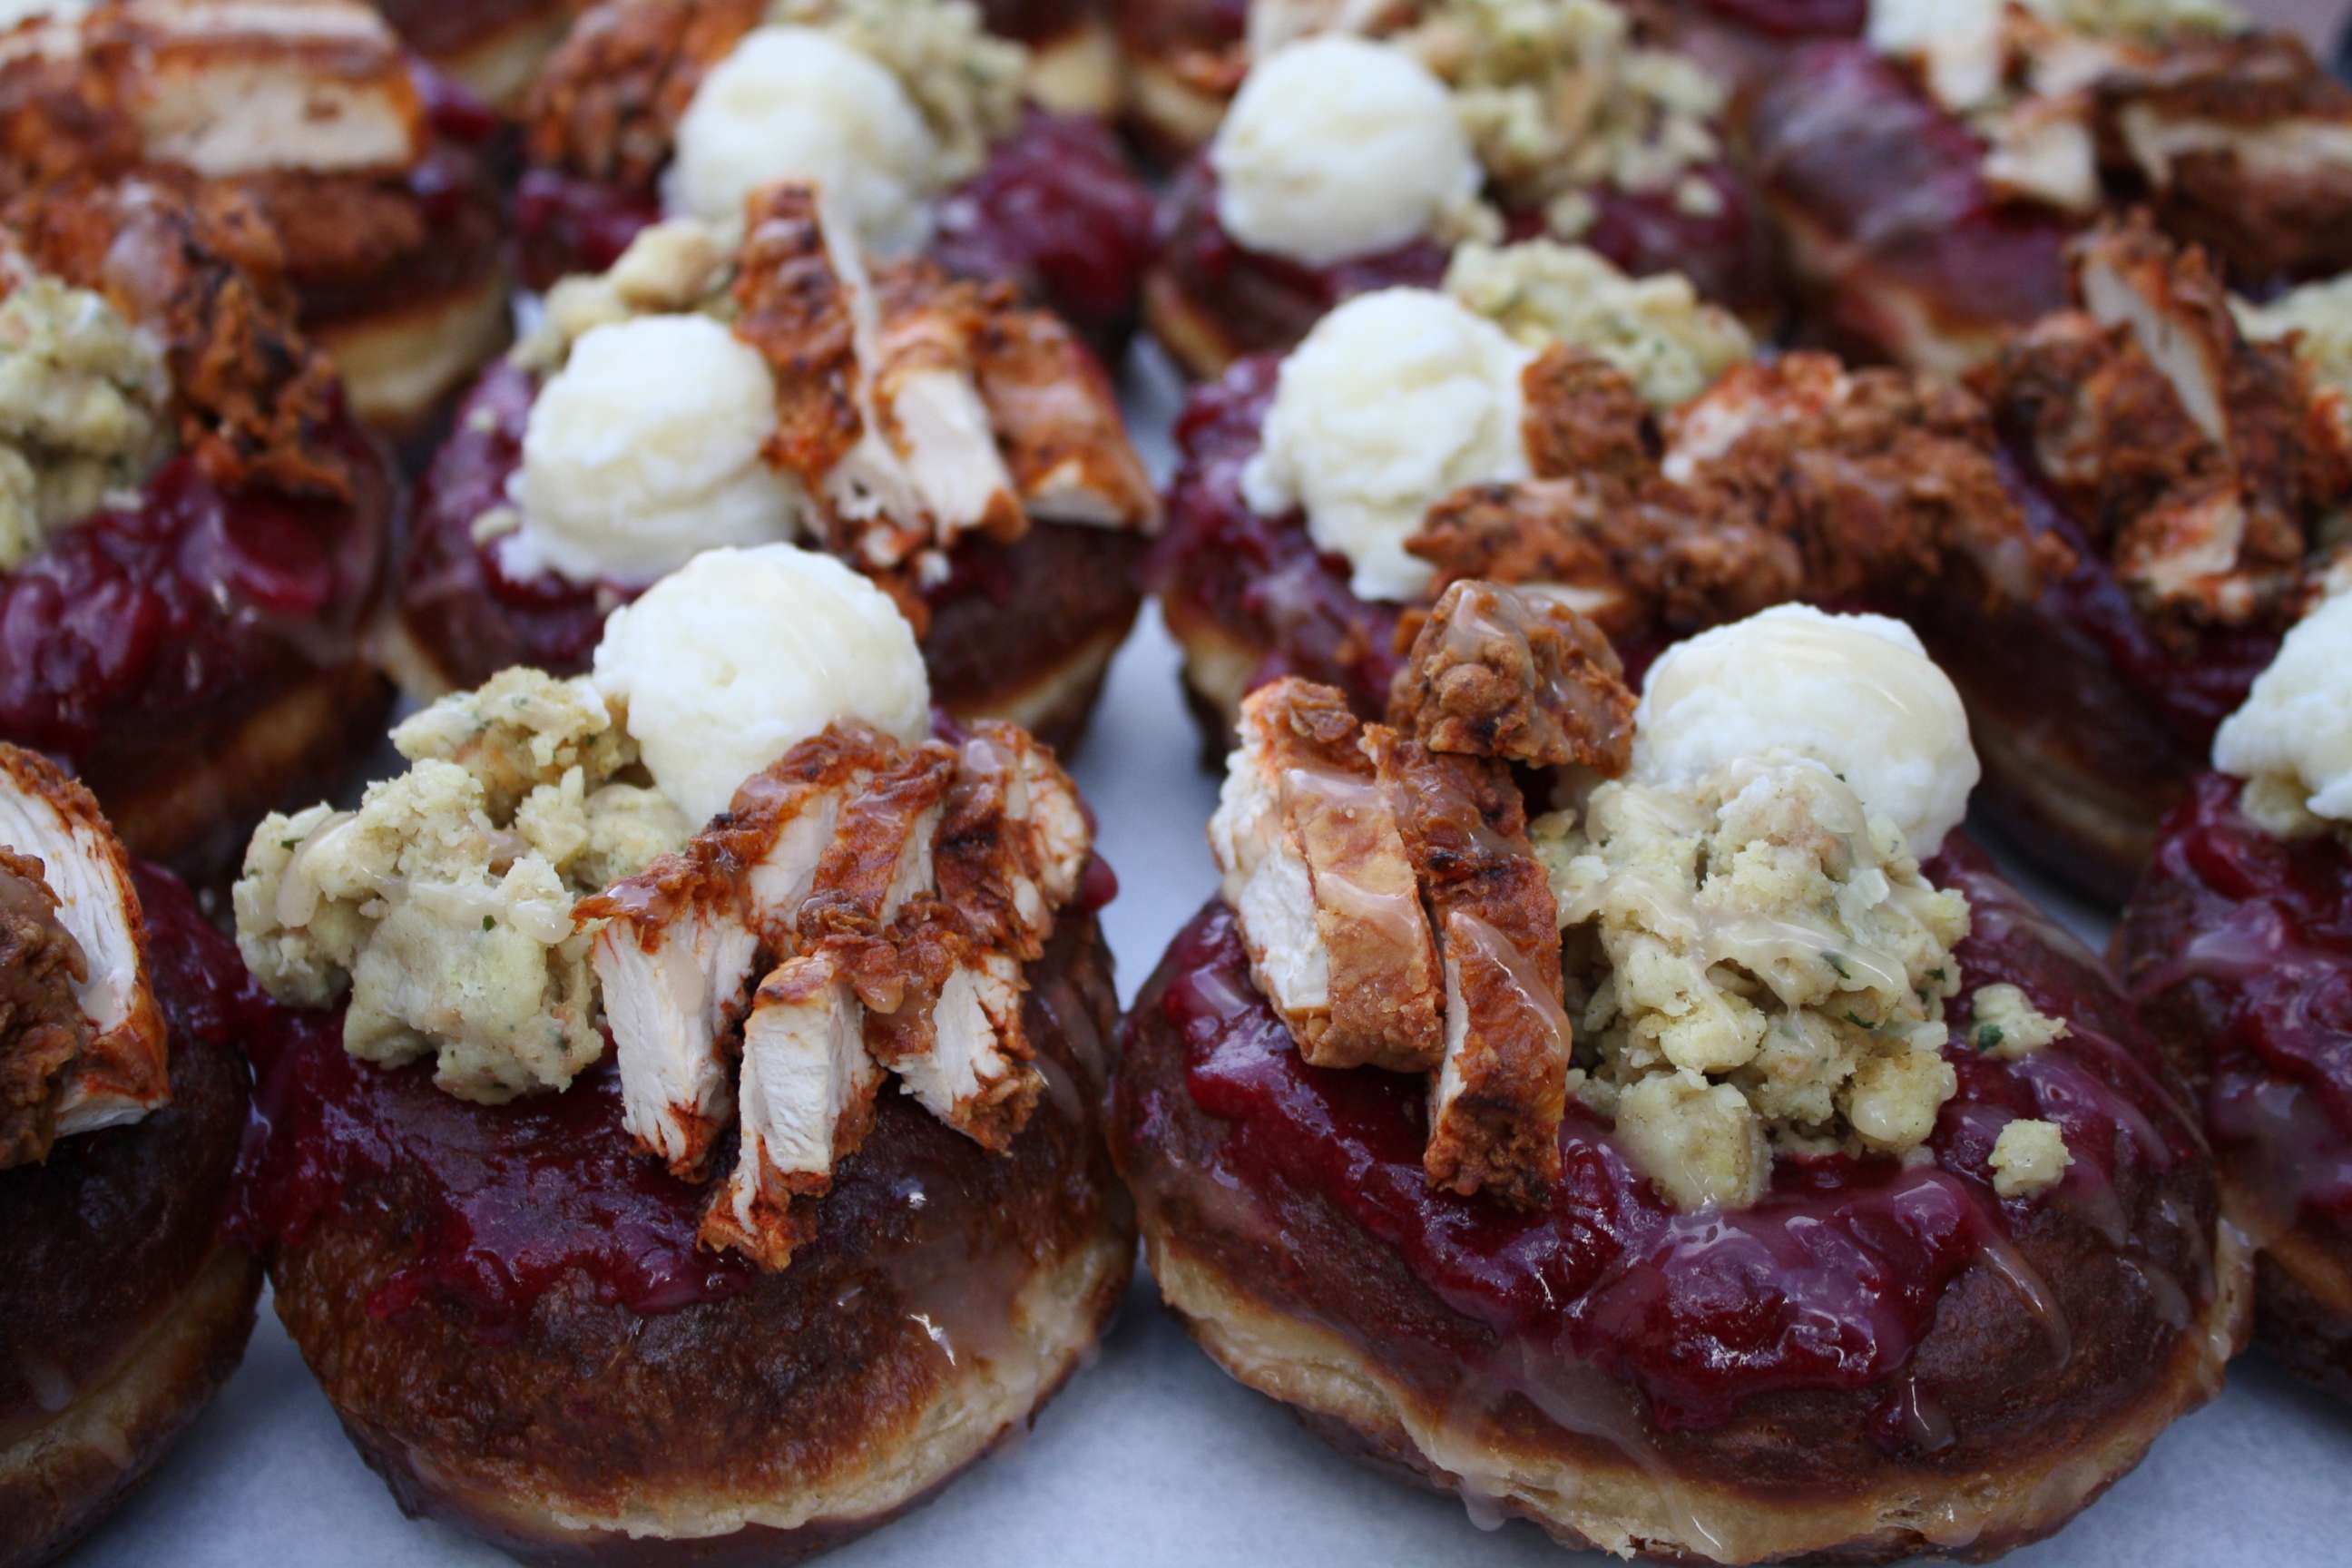 PHOTO: The donut features cranberry glaze, fried chicken, mashed potatoes, gravy and stuffing.